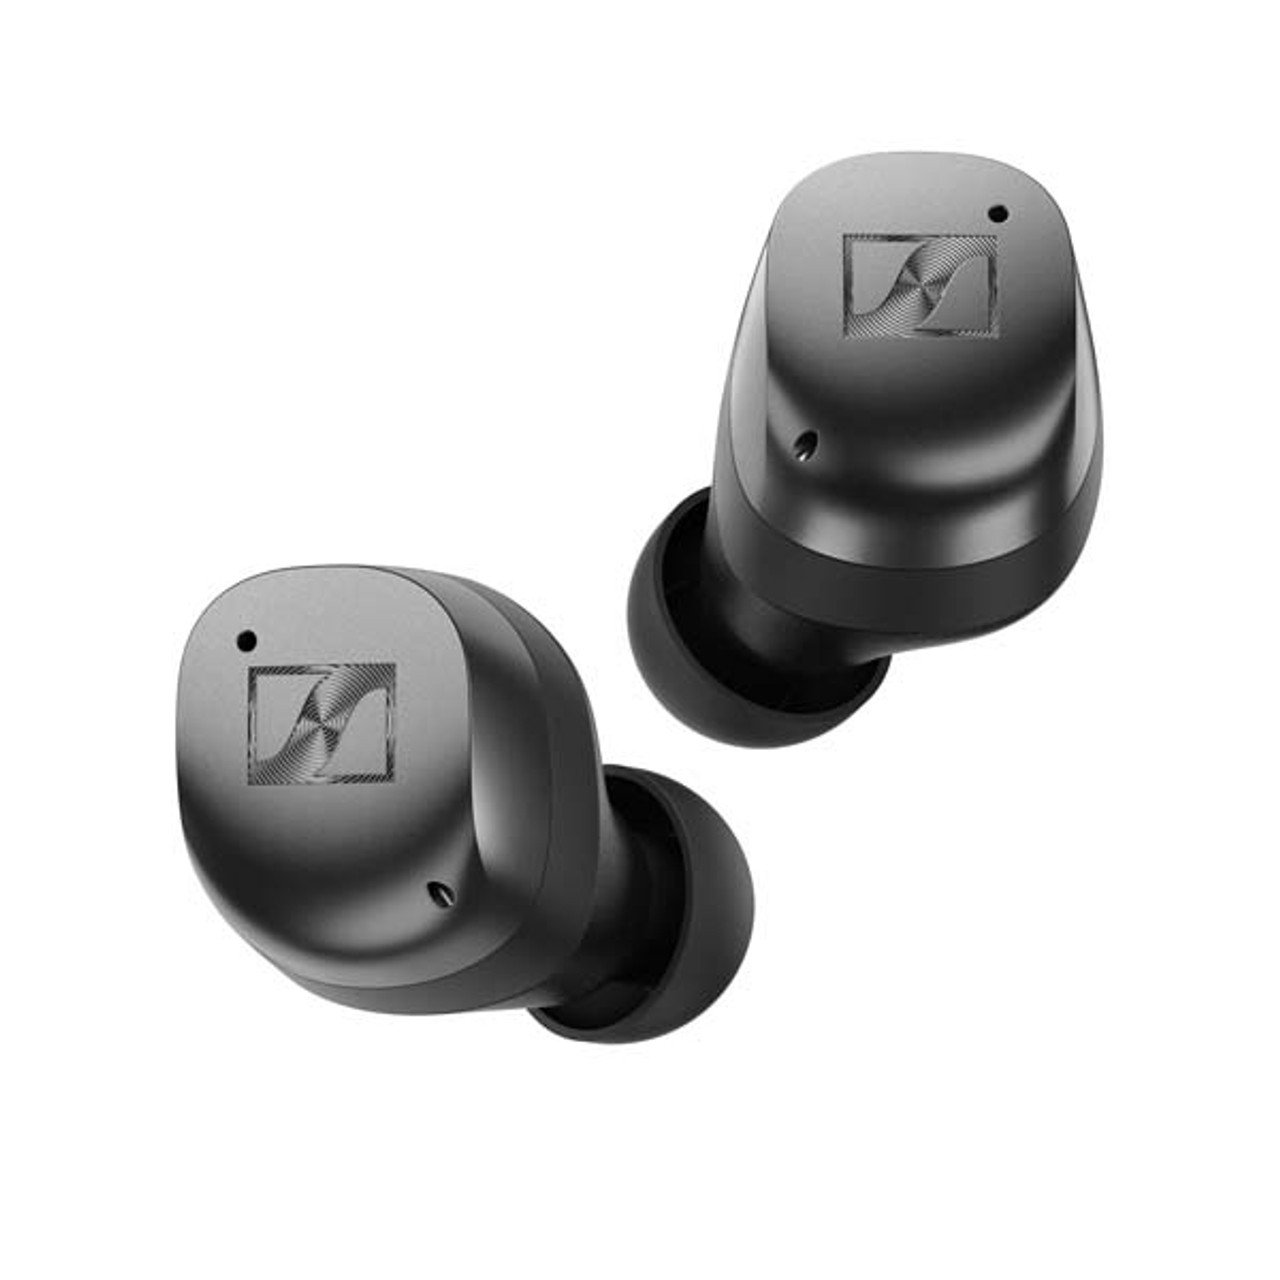 https://cdn.moon-audio.com/images/stencil/1280x1280/products/2212/13726/mtw_3_graphite_earbuds_front_3_final_1__08036.1683559192.jpg?c=1